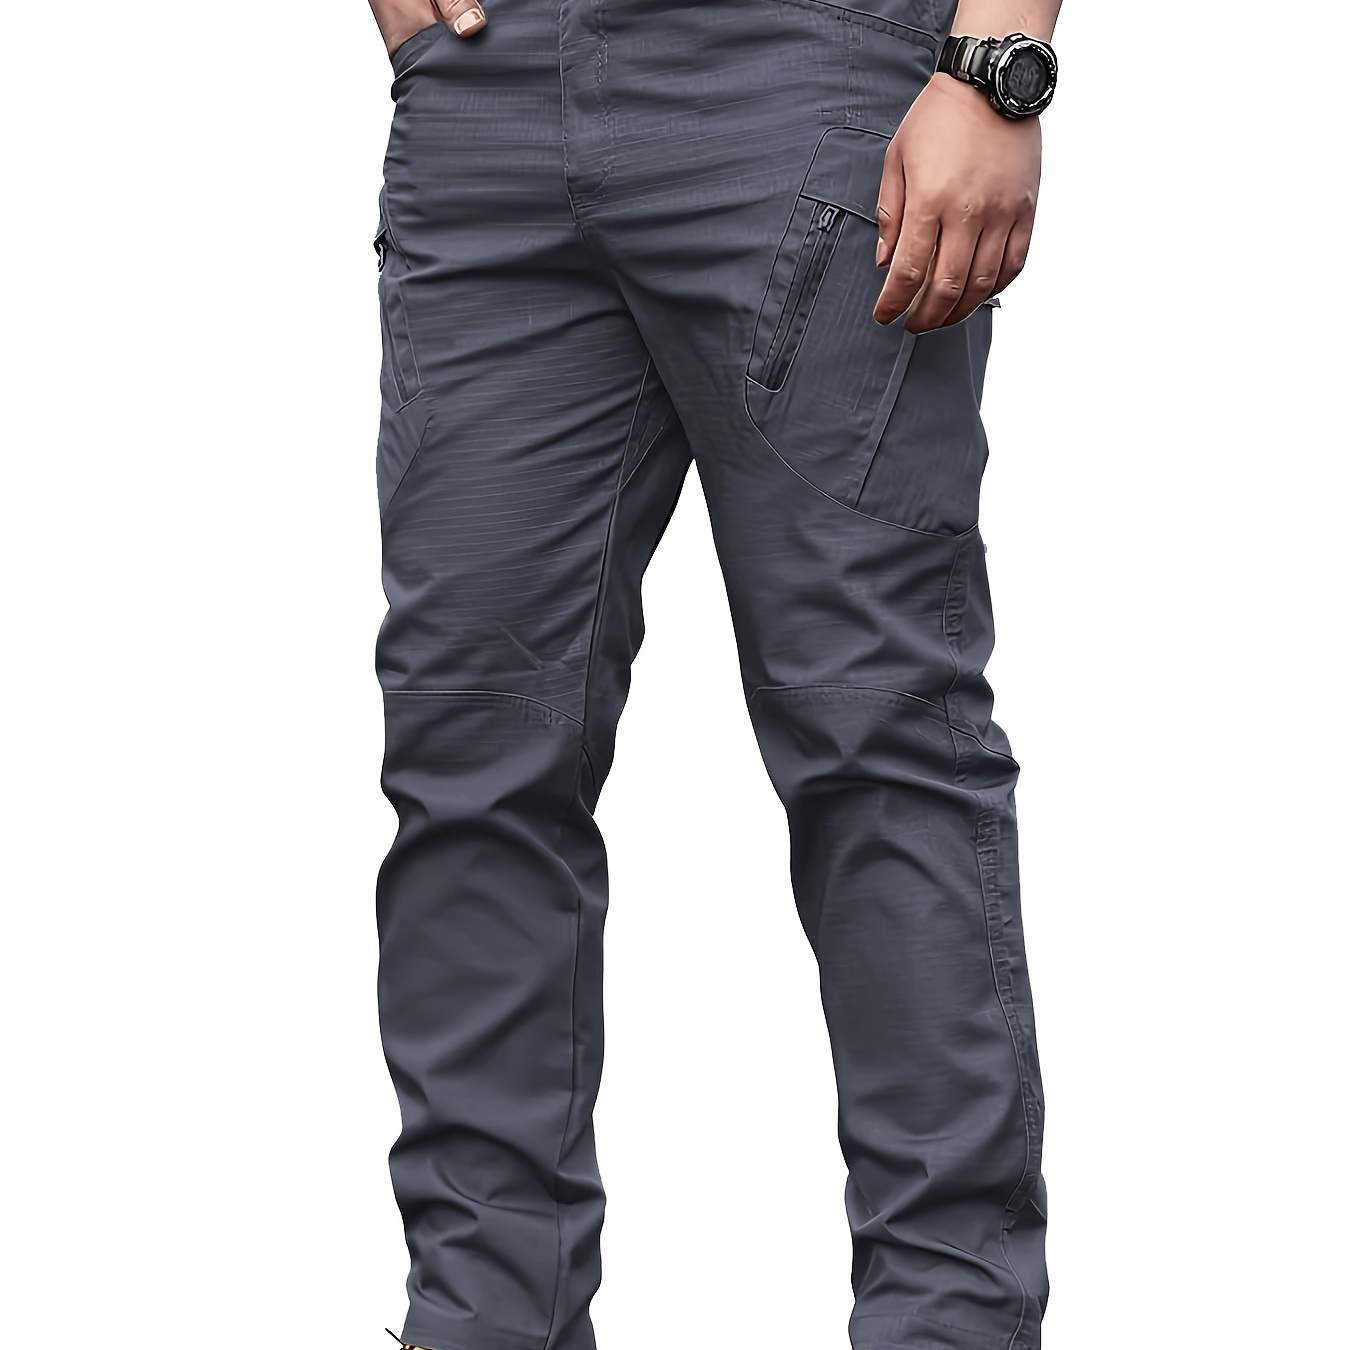 

Multi Pocket Men's Tactical Pants, Loose Casual Outdoor Military Pants Without Belt, Mens Cargo Pants For Hiking